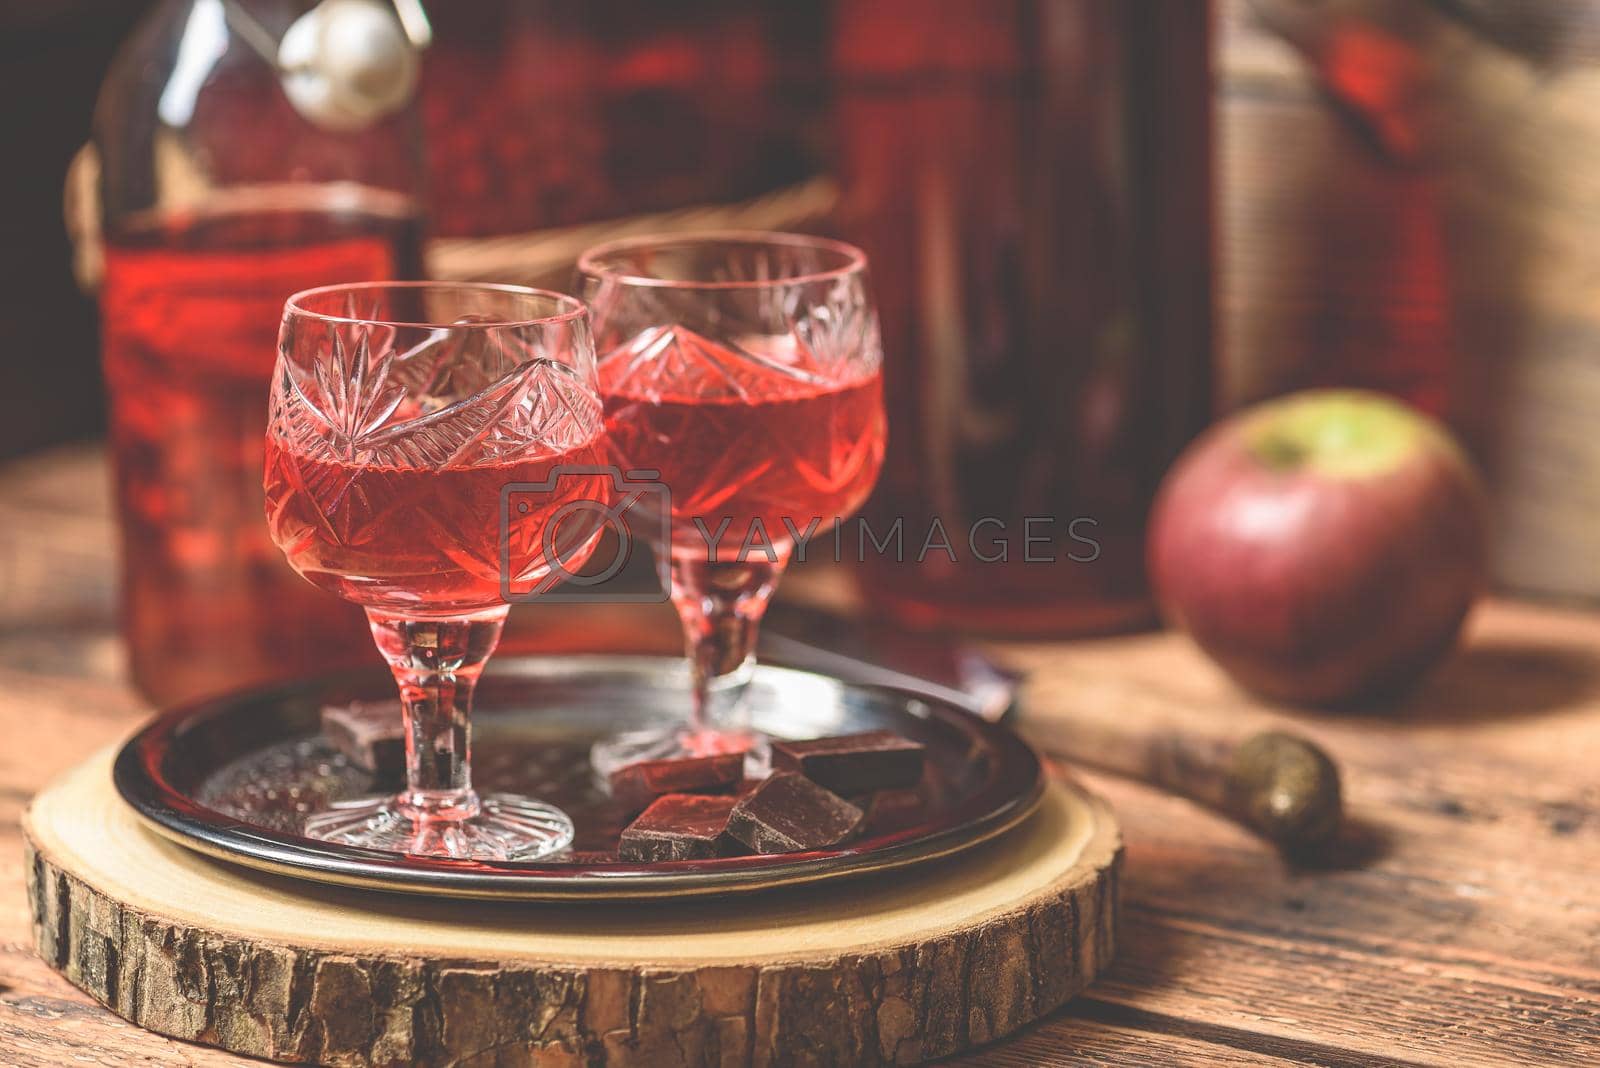 Royalty free image of Homemade berry alcoholic beverage and chocolate by Seva_blsv